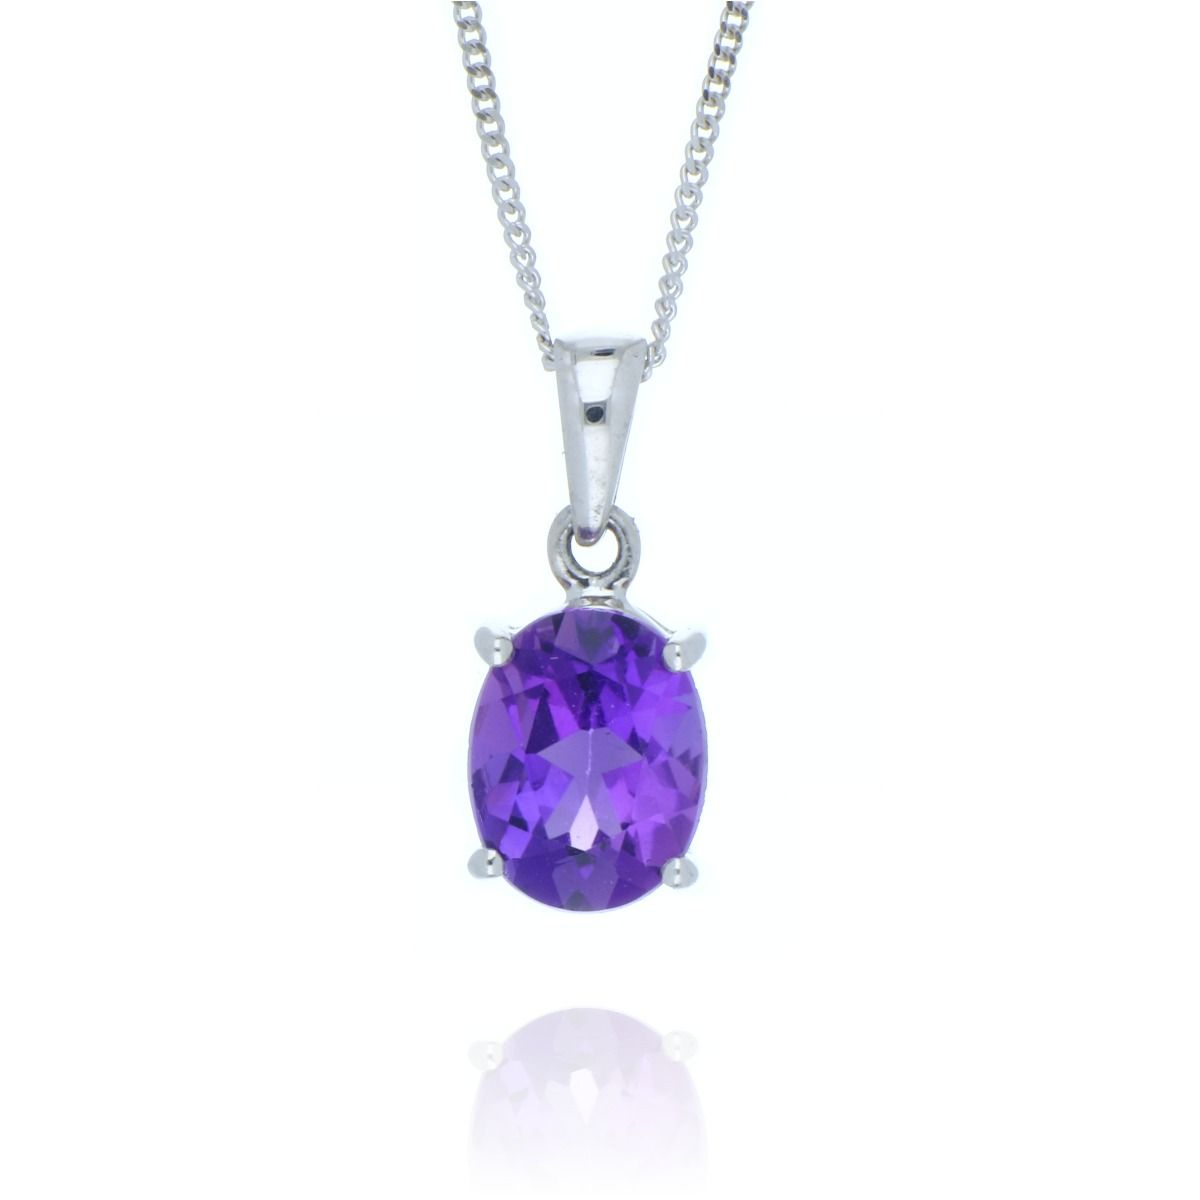 14K WHITE GOLD AMETHYST PENDANT ON NECKLACE WITH TINY DIAMOND ACCENTS GOLD-934A  | eBay